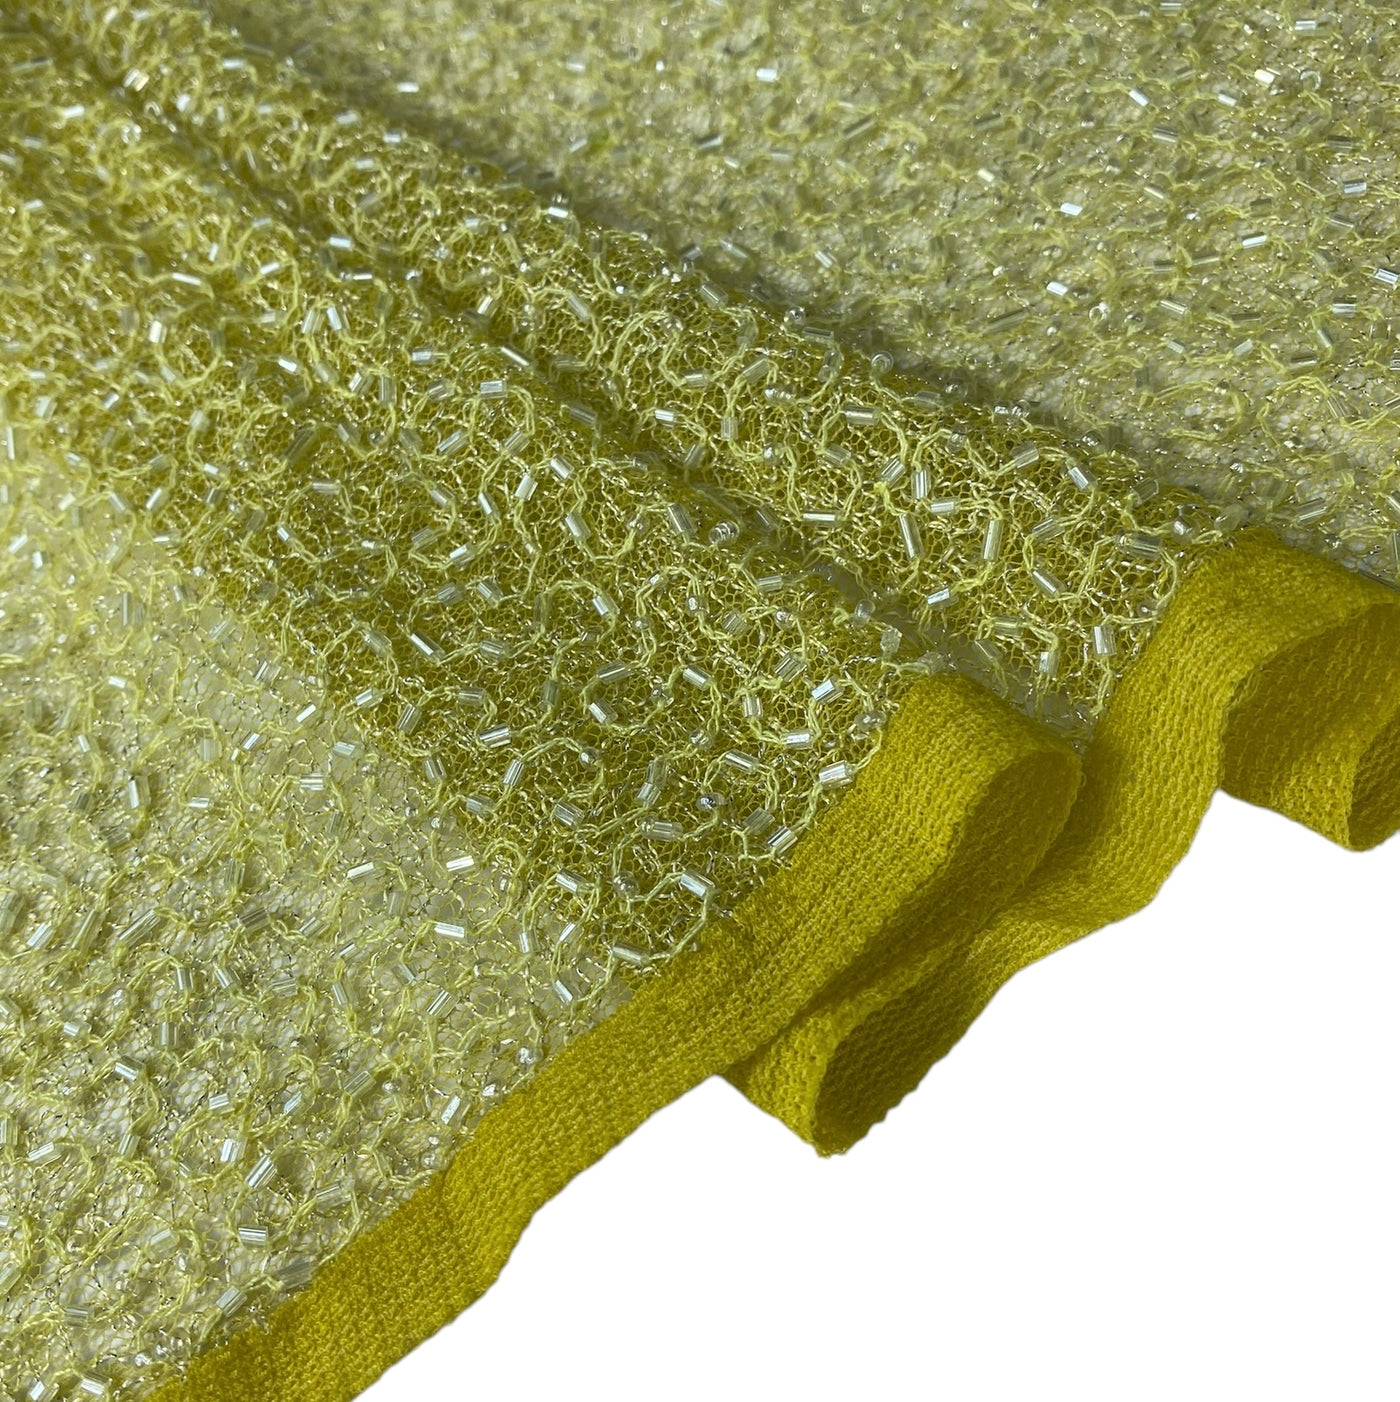 Glass Beaded Crochet Lace - Remnant - Yellow